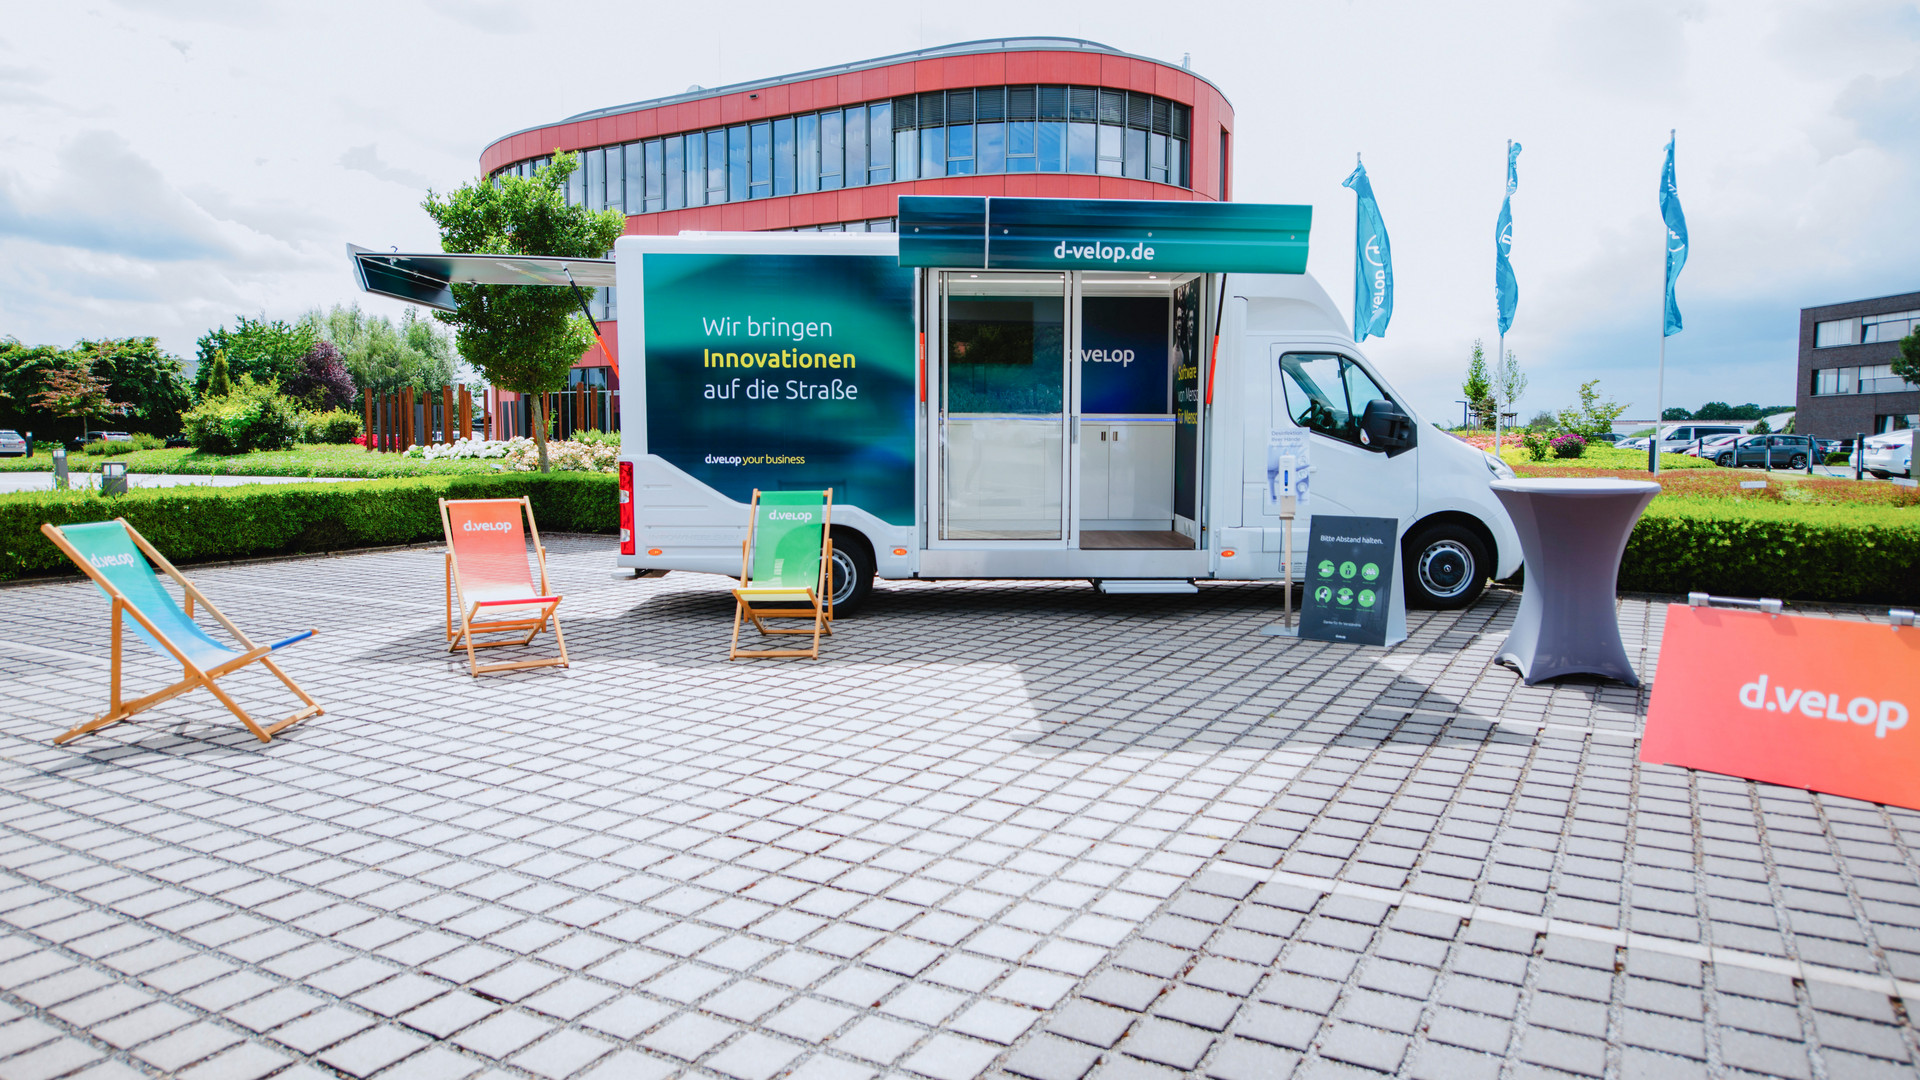 InfoWheels for dvelop in summer with sun chairs